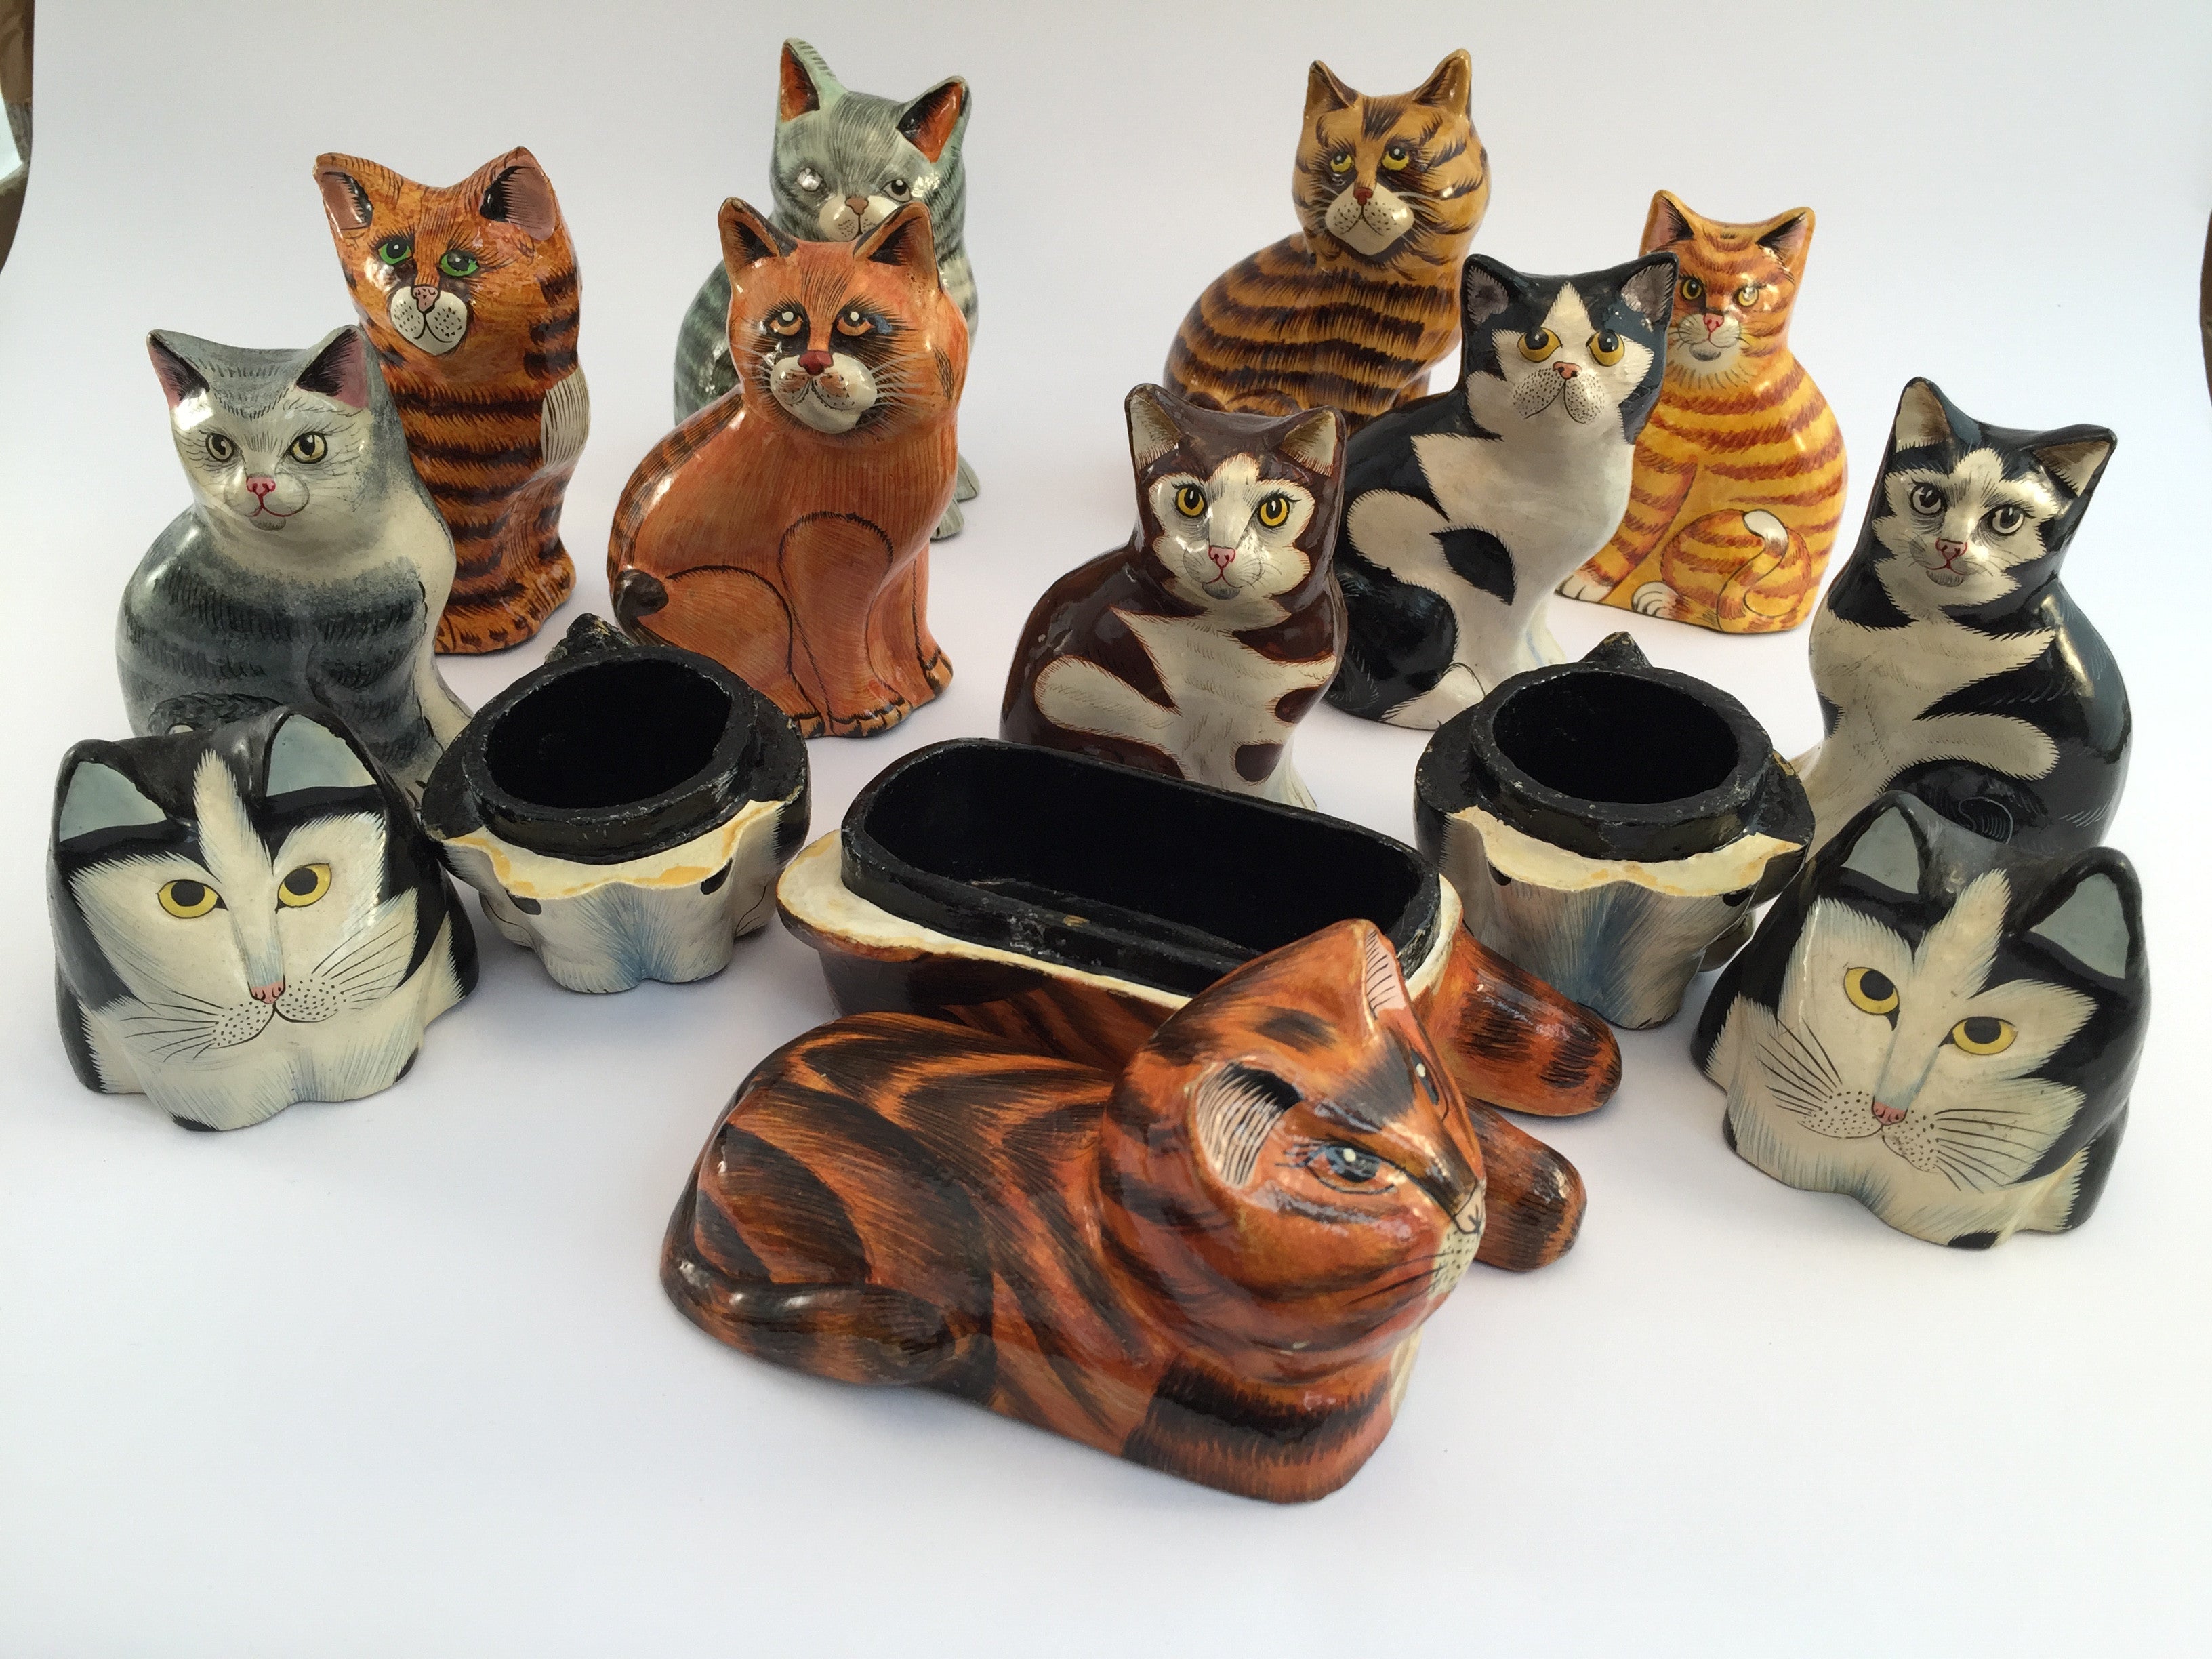 A family of 12 Indian made Cat figurines – Katoomie